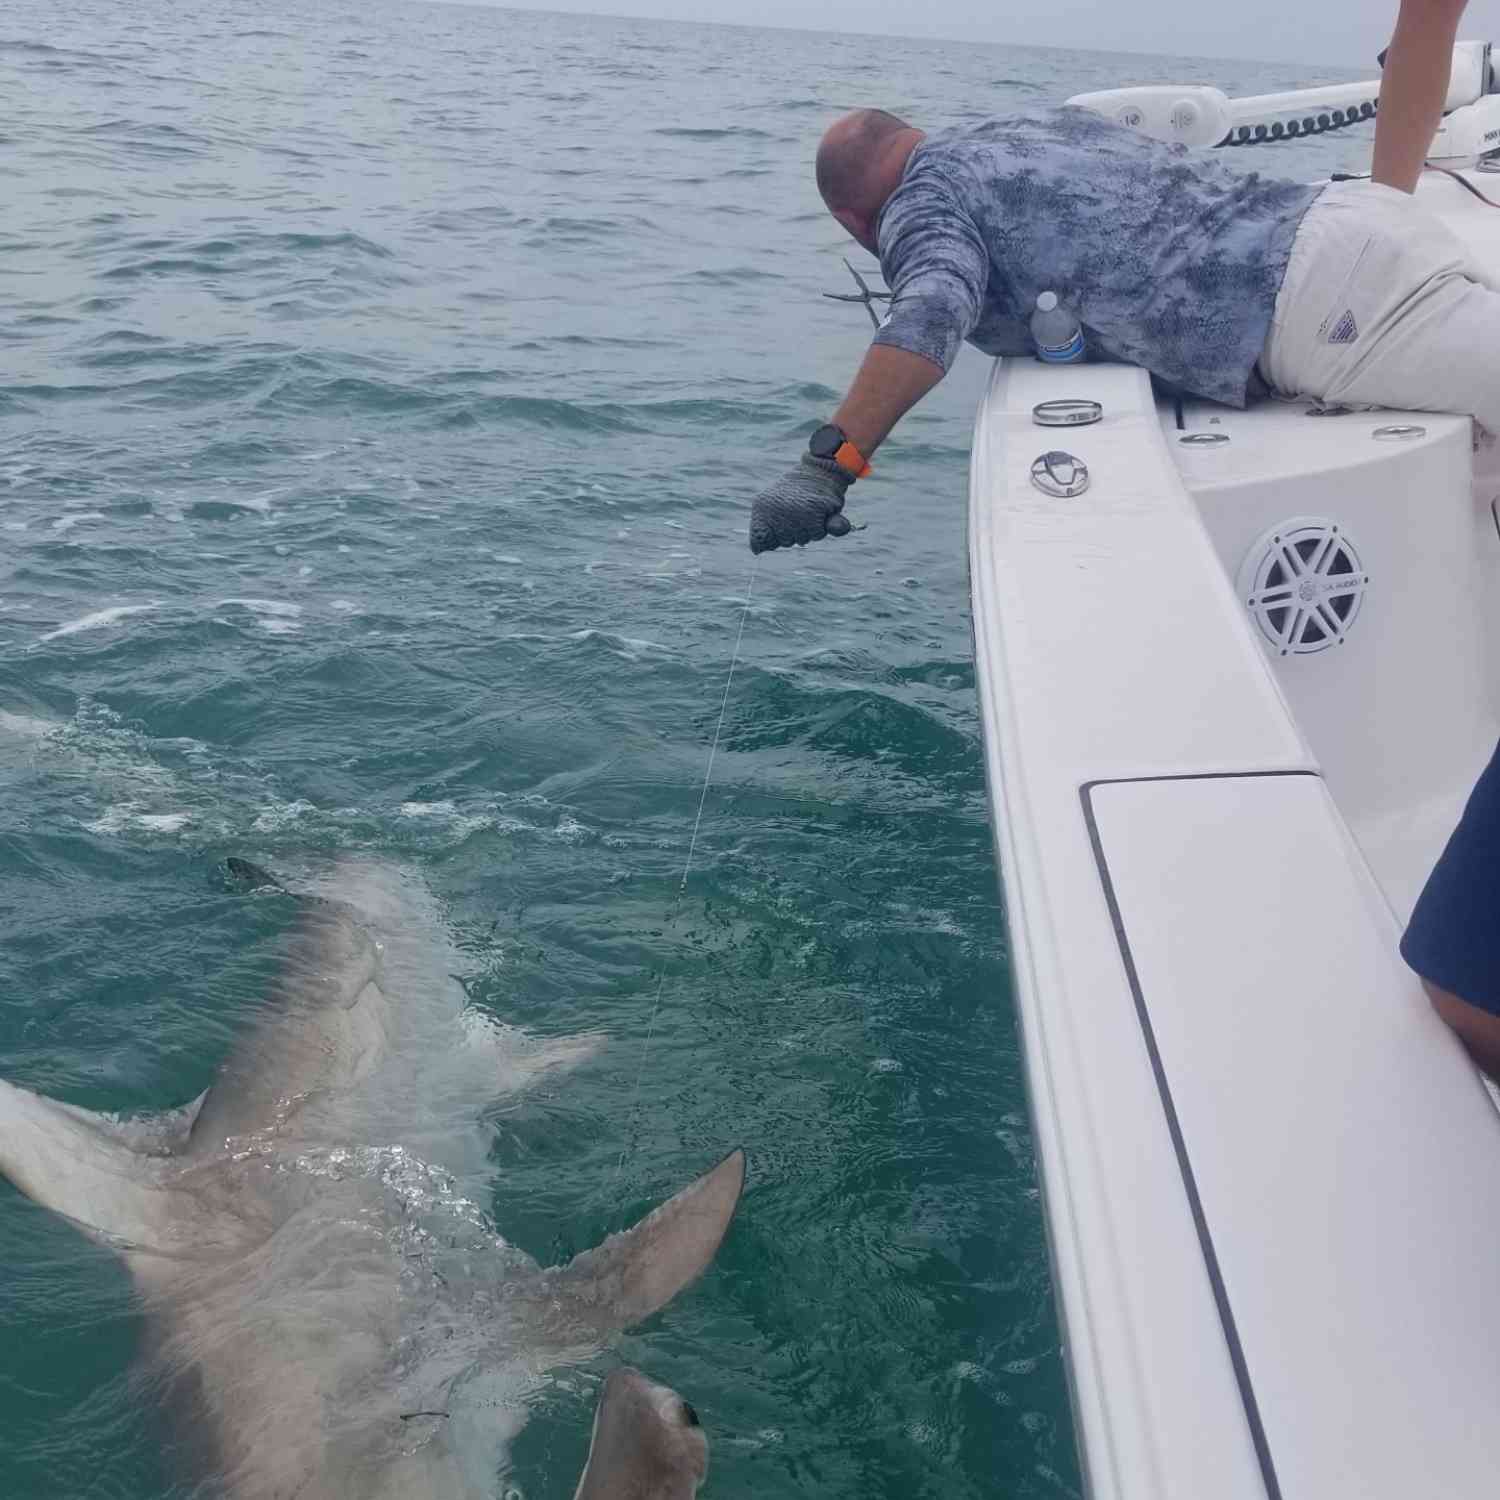 Title: Hammerhead on the Sportsman - On board their Sportsman Heritage 241 Center Console - Location: Boca Grande. Participating in the Photo Contest #SportsmanJune2020